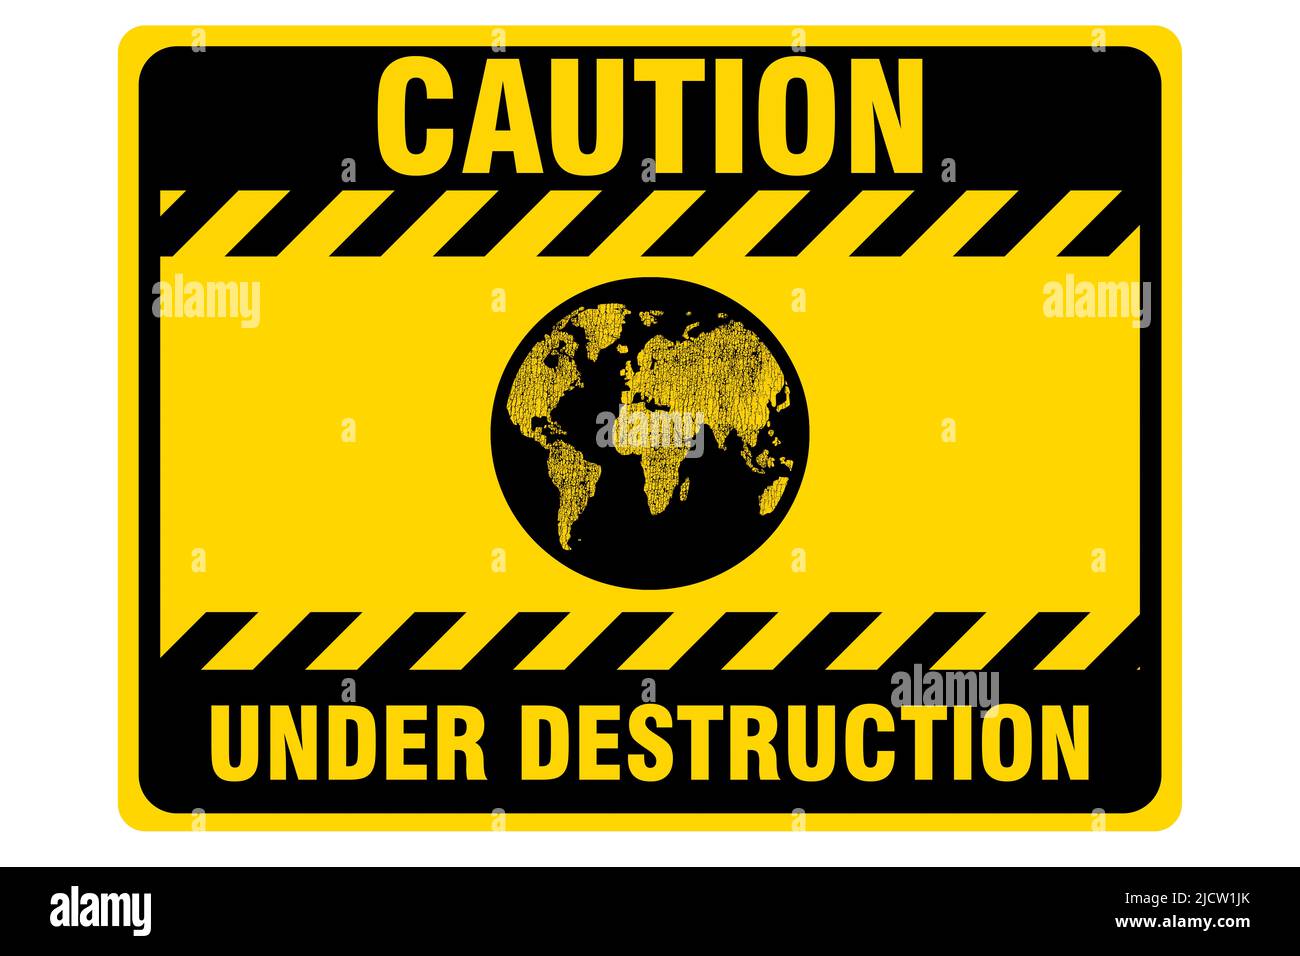 Caution world under destruction warning sign, climate change and environmental crisis concept Stock Photo